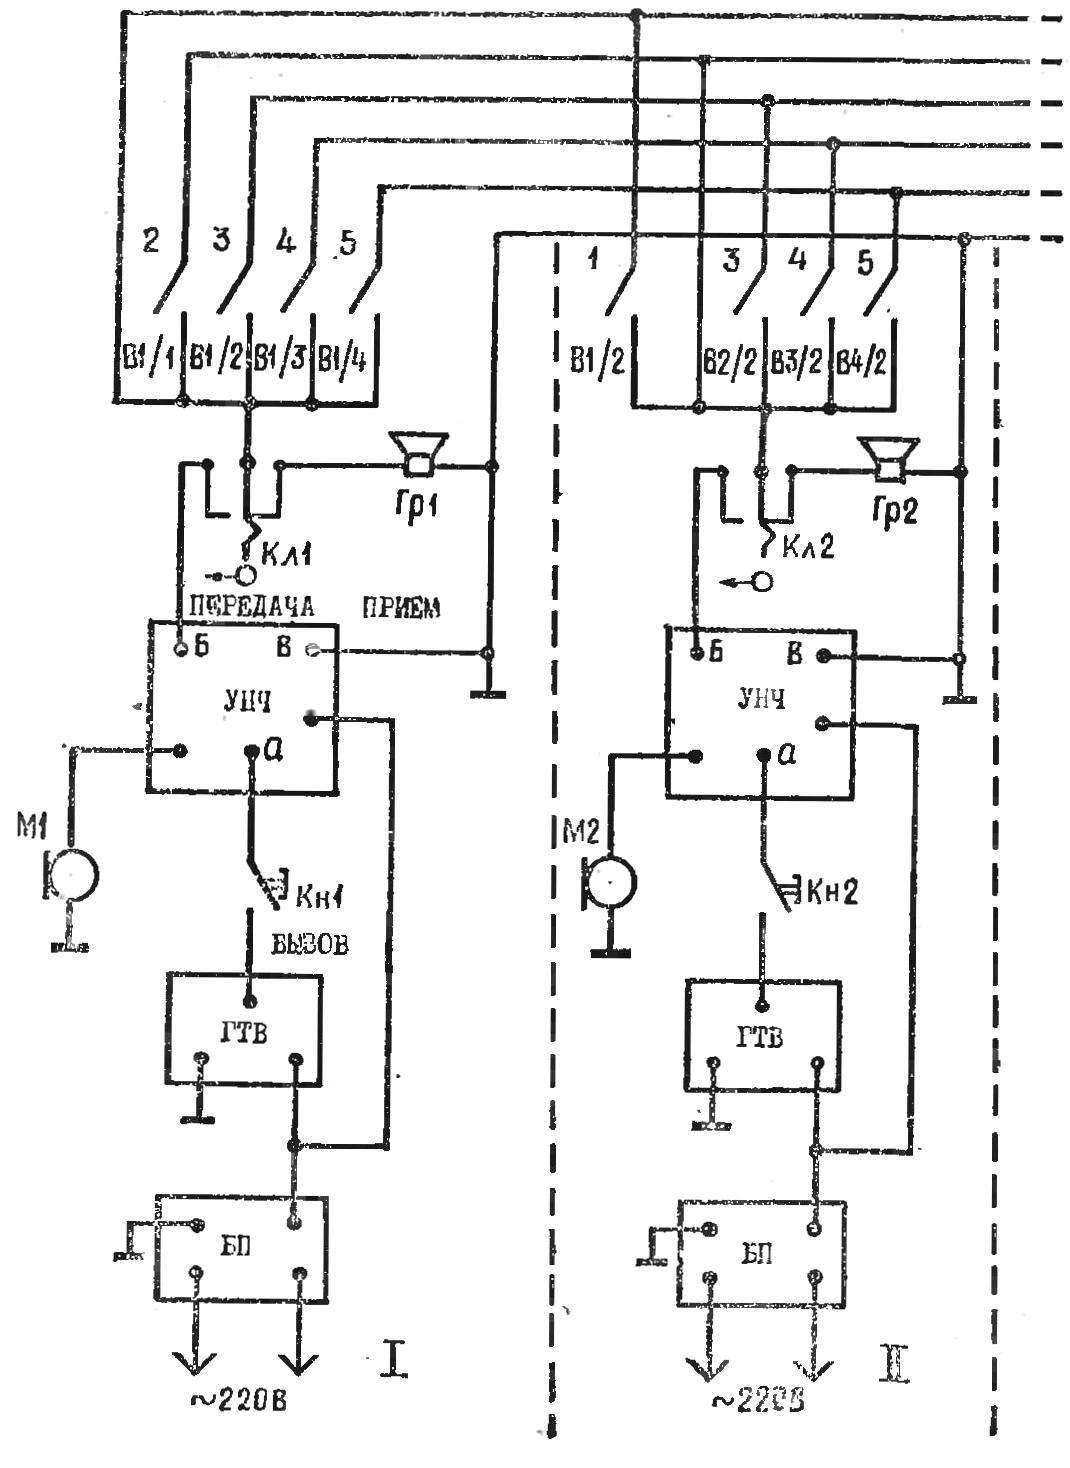 Fig. 8. Connection diagram of devices to the communication line.